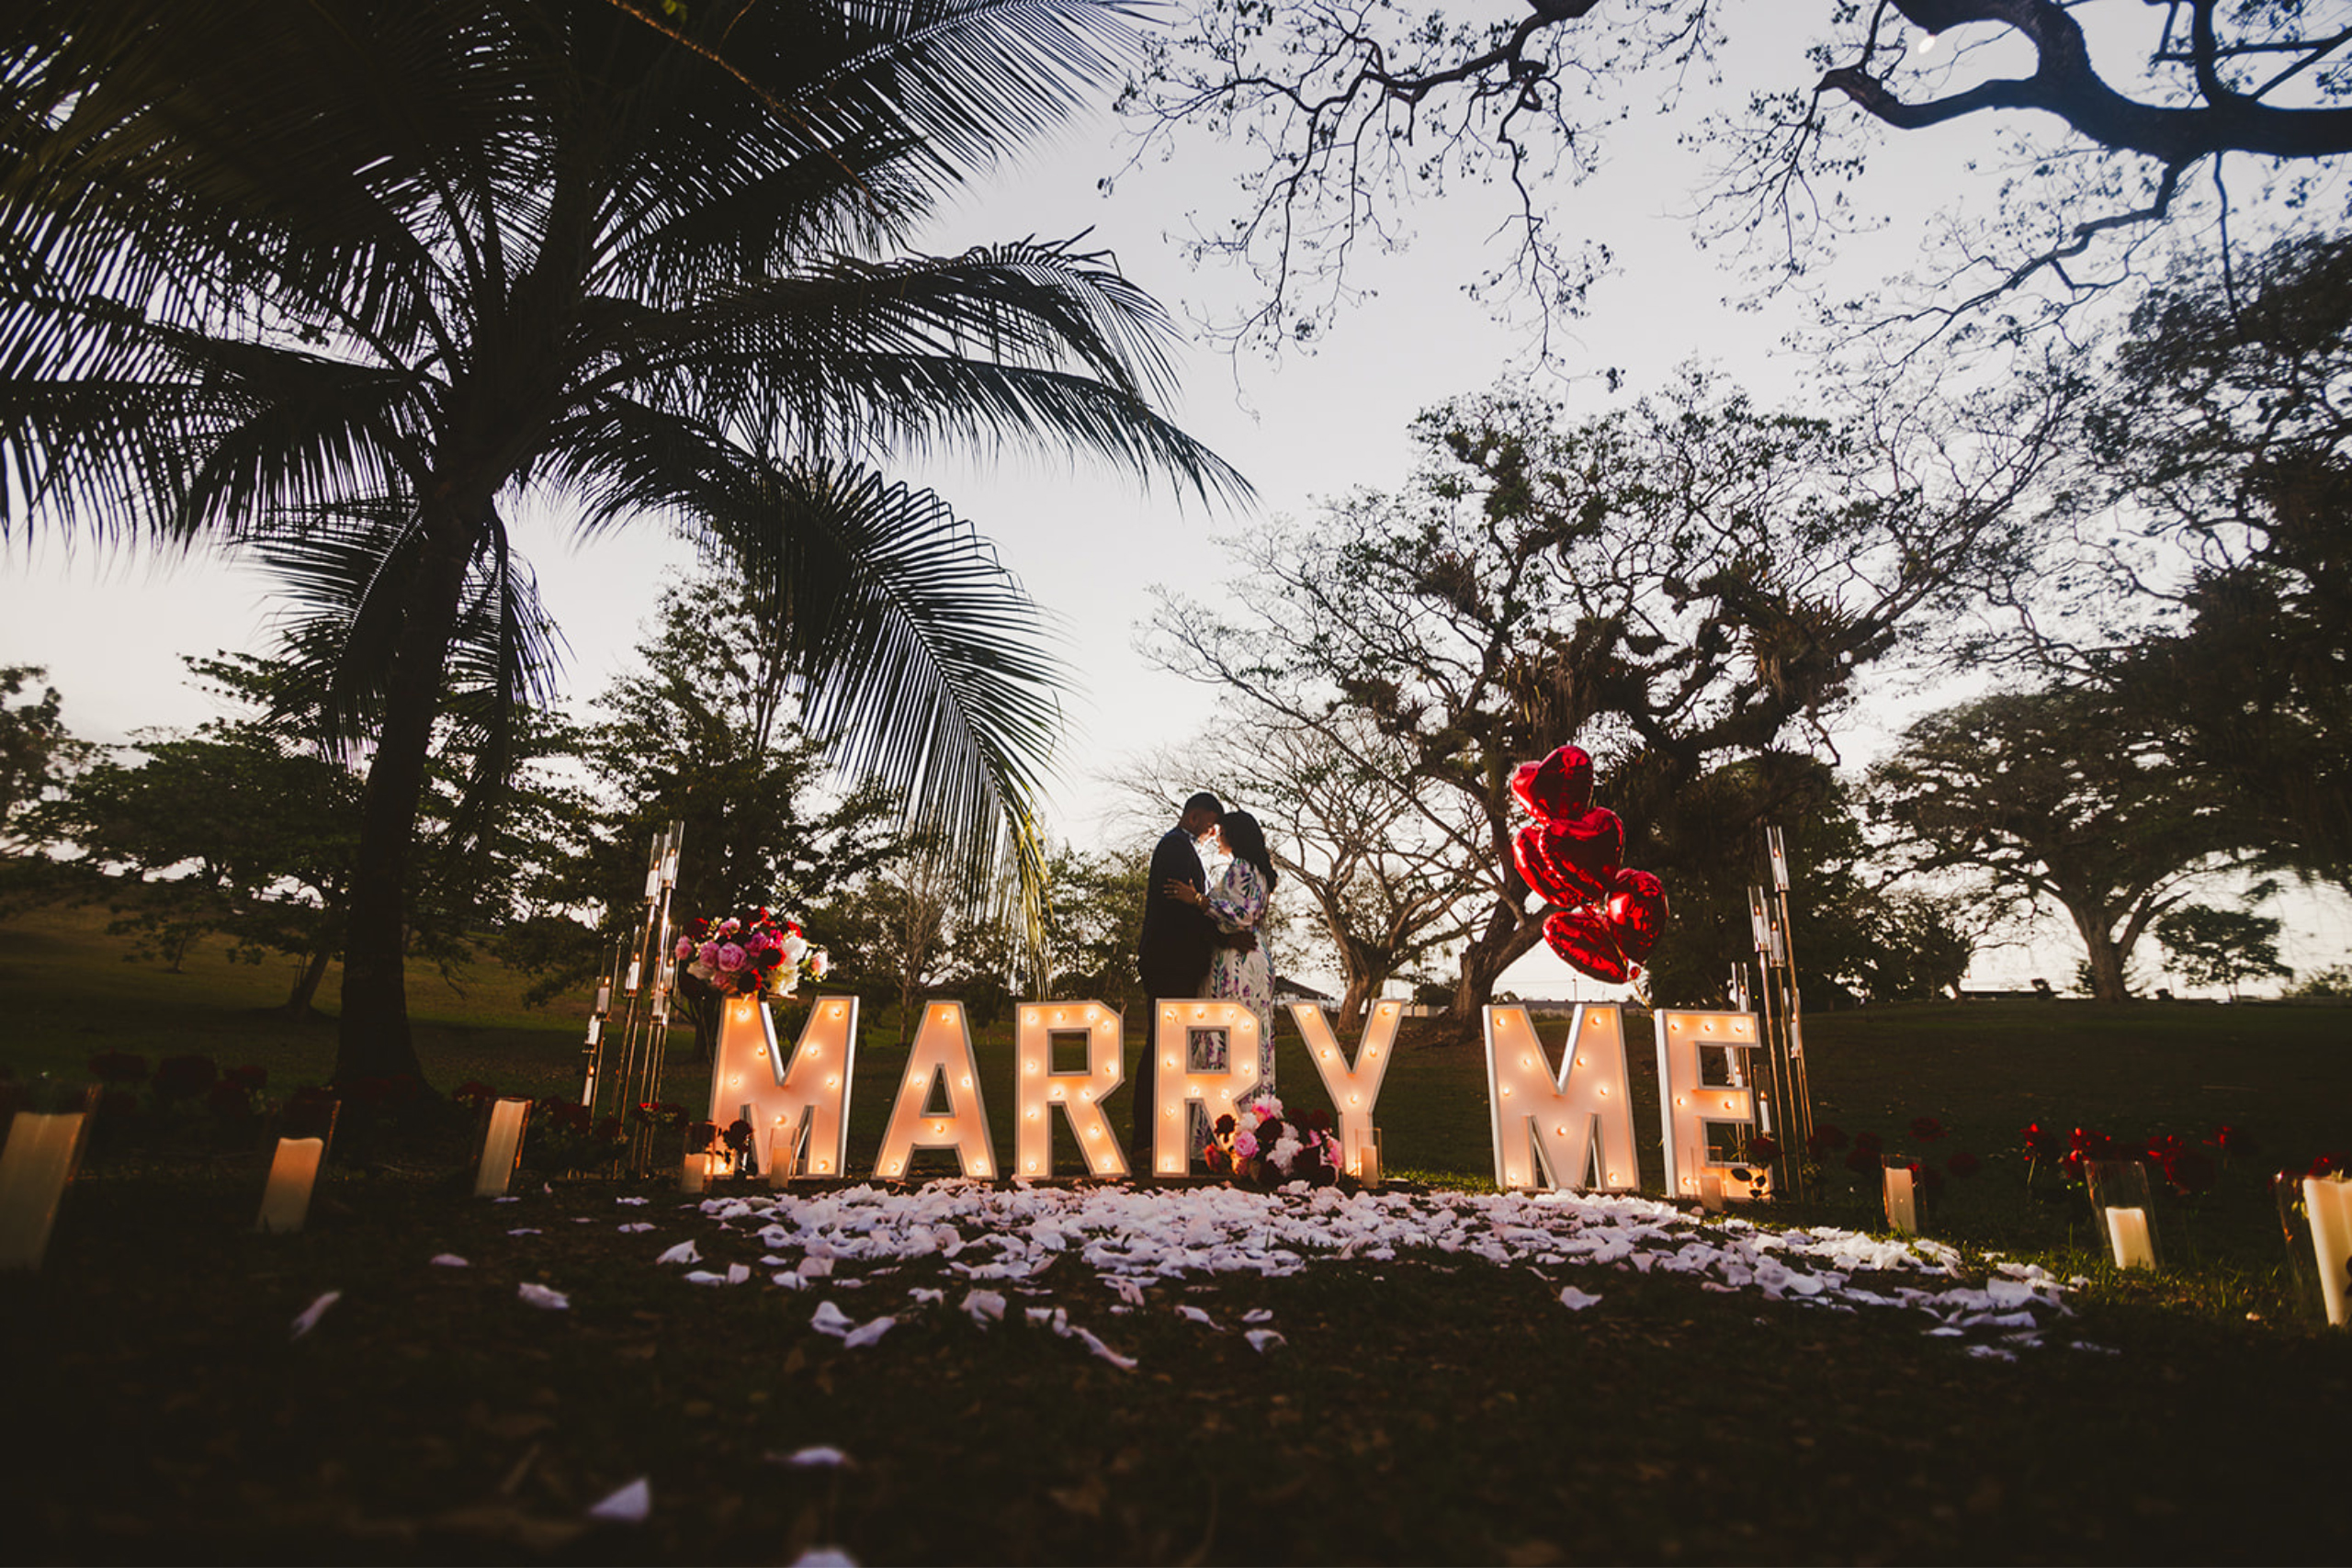 Romantic Marquee letters Marriage Proposal Setup at Palmiste Park San Fernando Trinidad and Tobago. Setup by Picnic-Perfect Ltd. Photo by Ravindra Ramkallawan Photography